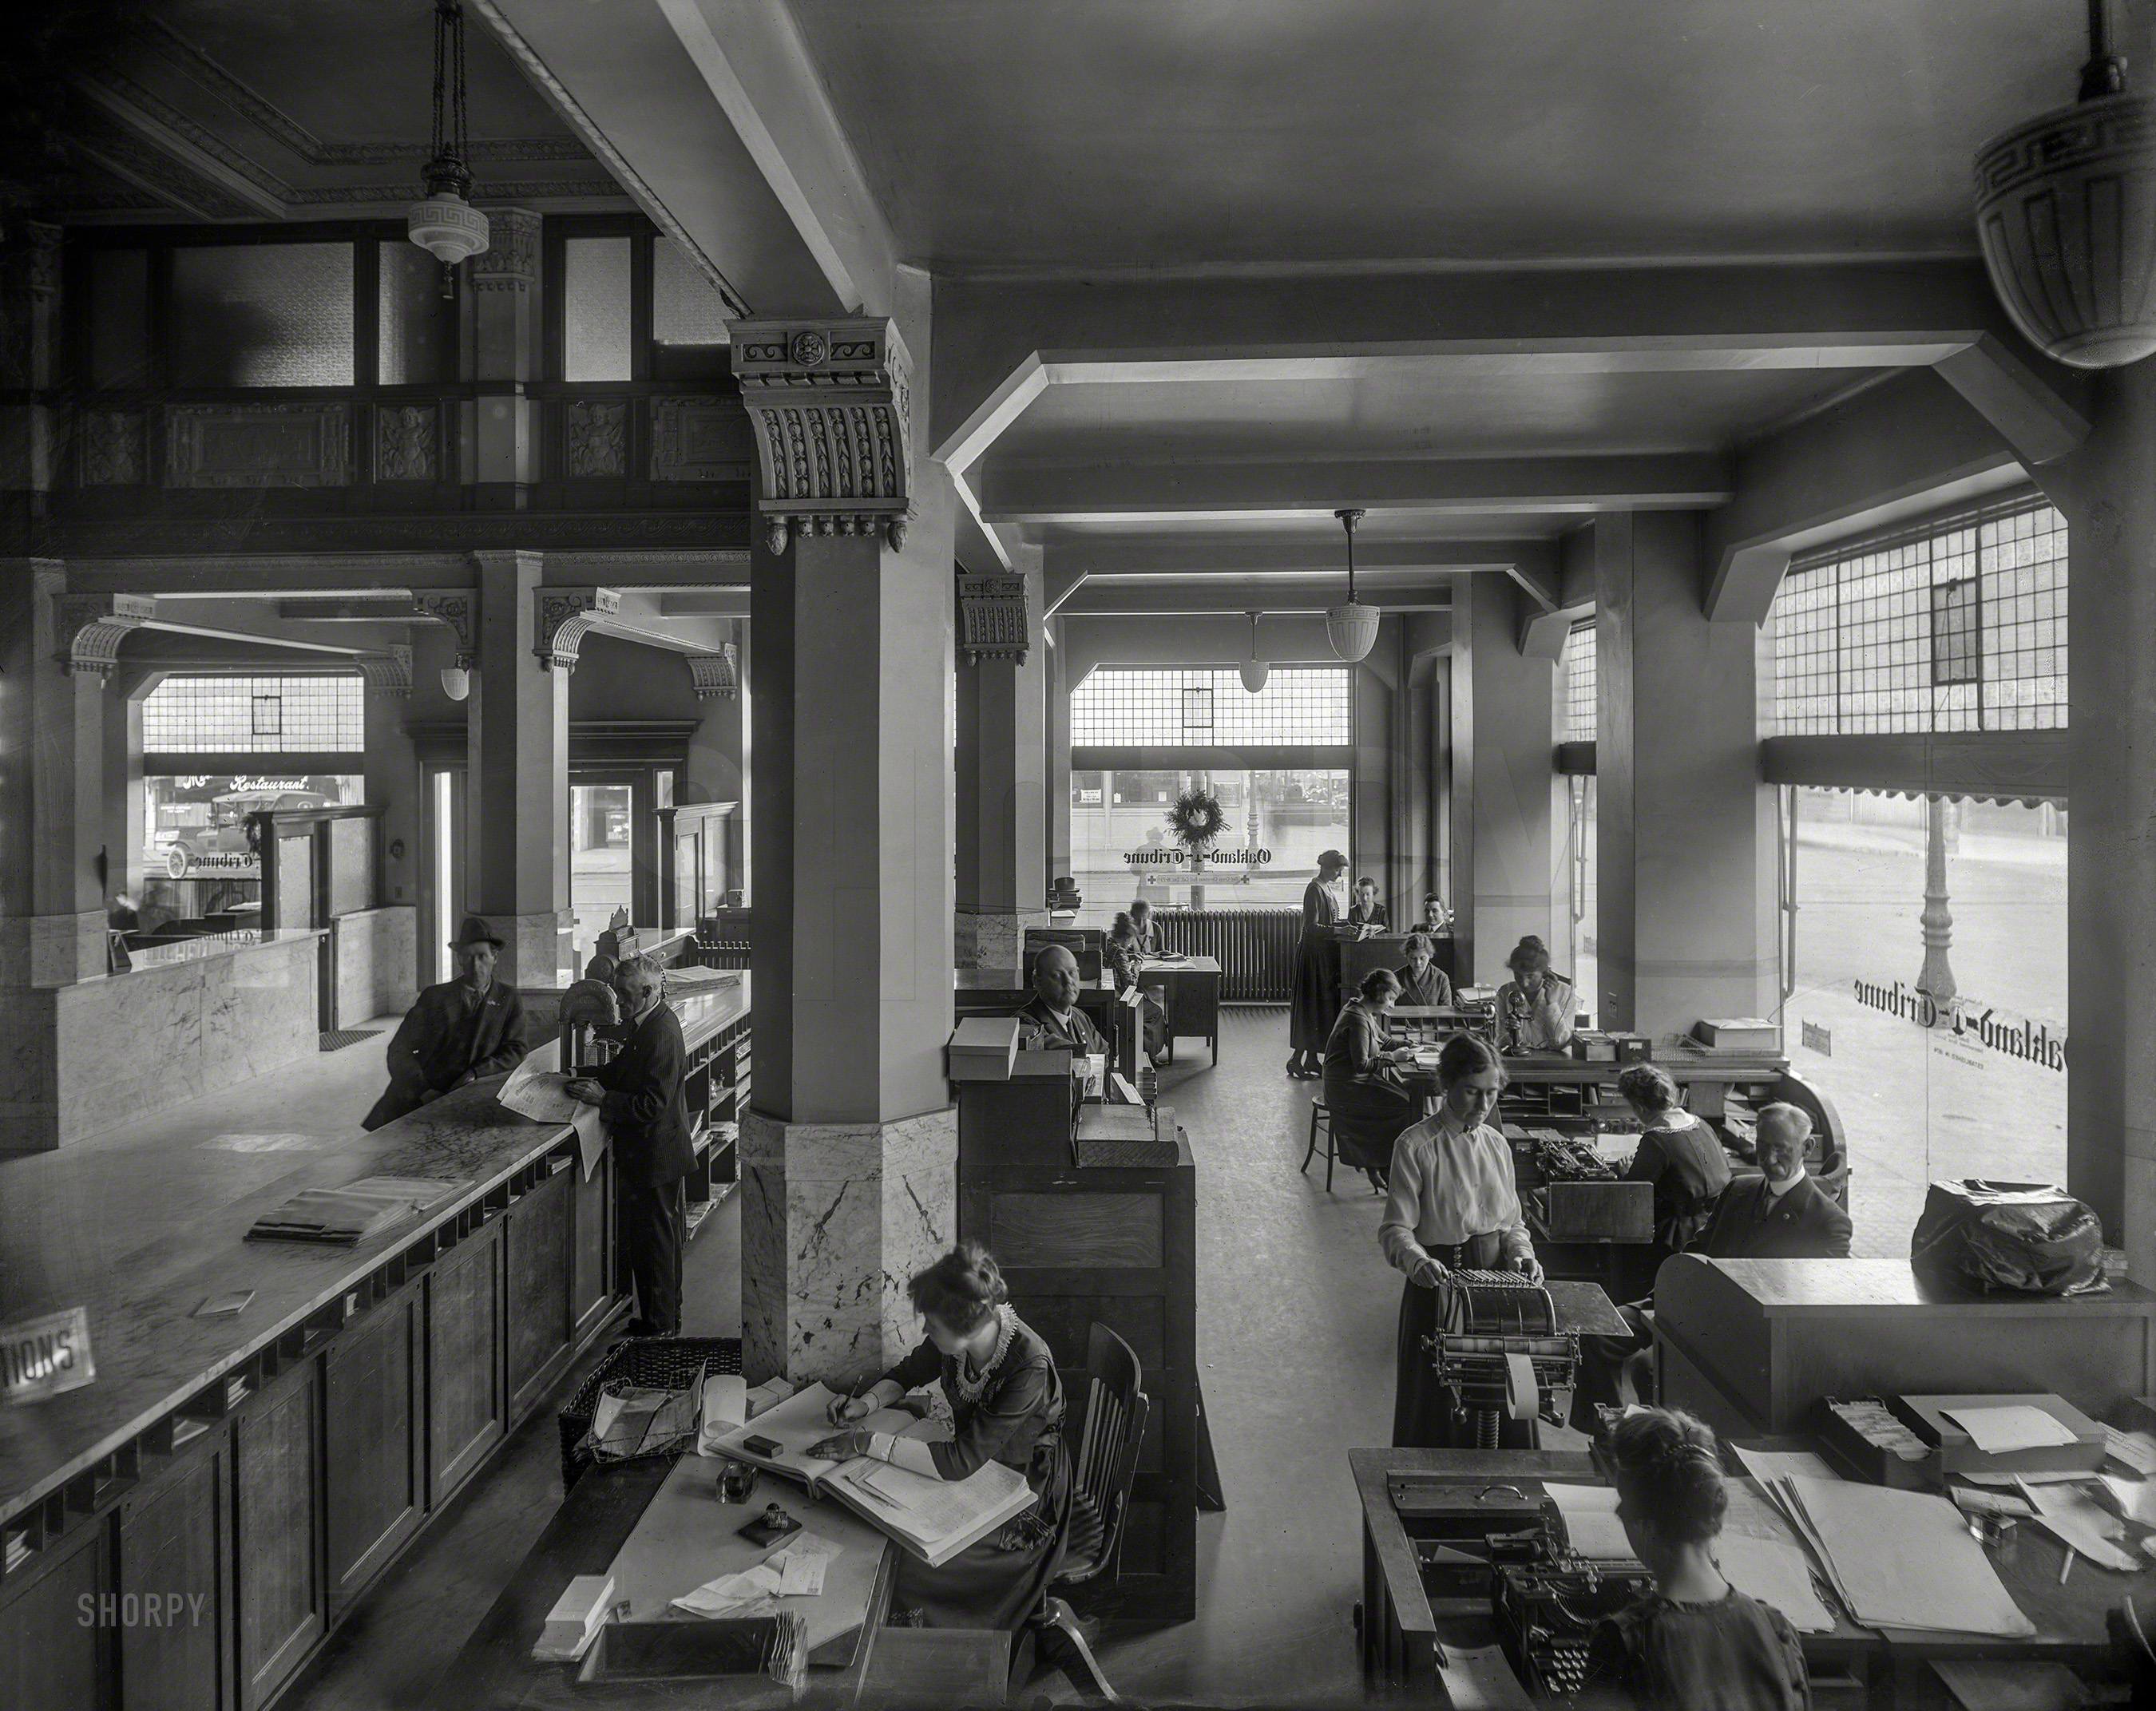 Oakland, California, circa 1920. "Offices of the Oakland Tribune." The premises of the late lamented newspaper (1874-2016) are now home to a bar, the Tribune Tavern. 8x10 glass negative by the Cheney Photo Advertising Co. View full size.